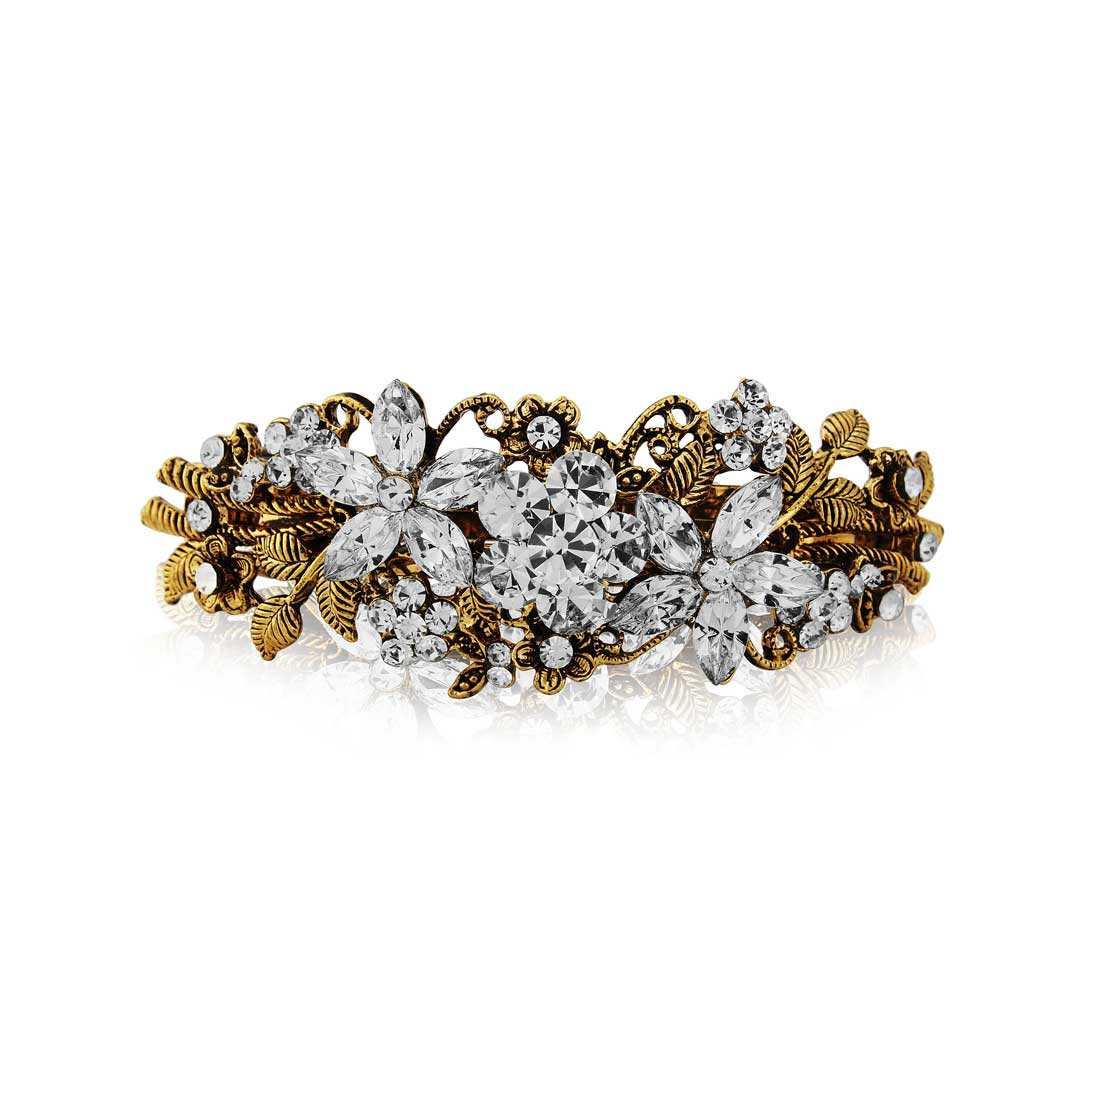 Golden Bouquet Crystal Floral Decorative Hair Clip for Weddings & Special Occasions